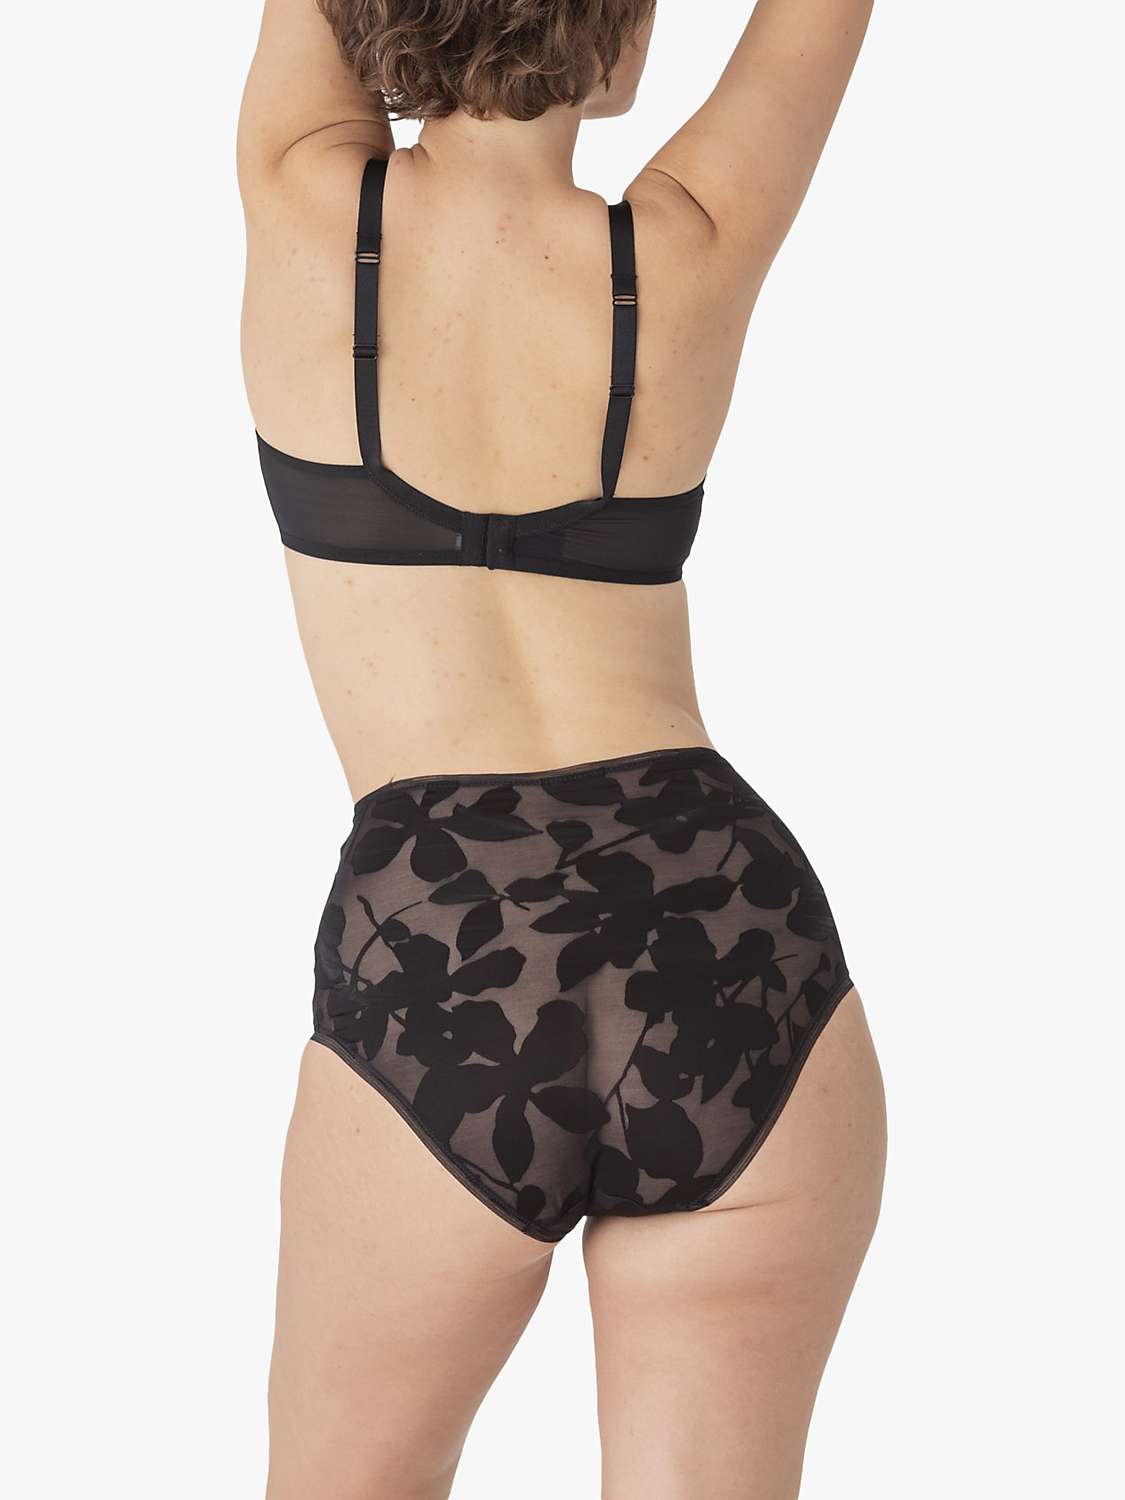 Buy Maison Lejaby Ombrage High Waisted Knickers Online at johnlewis.com